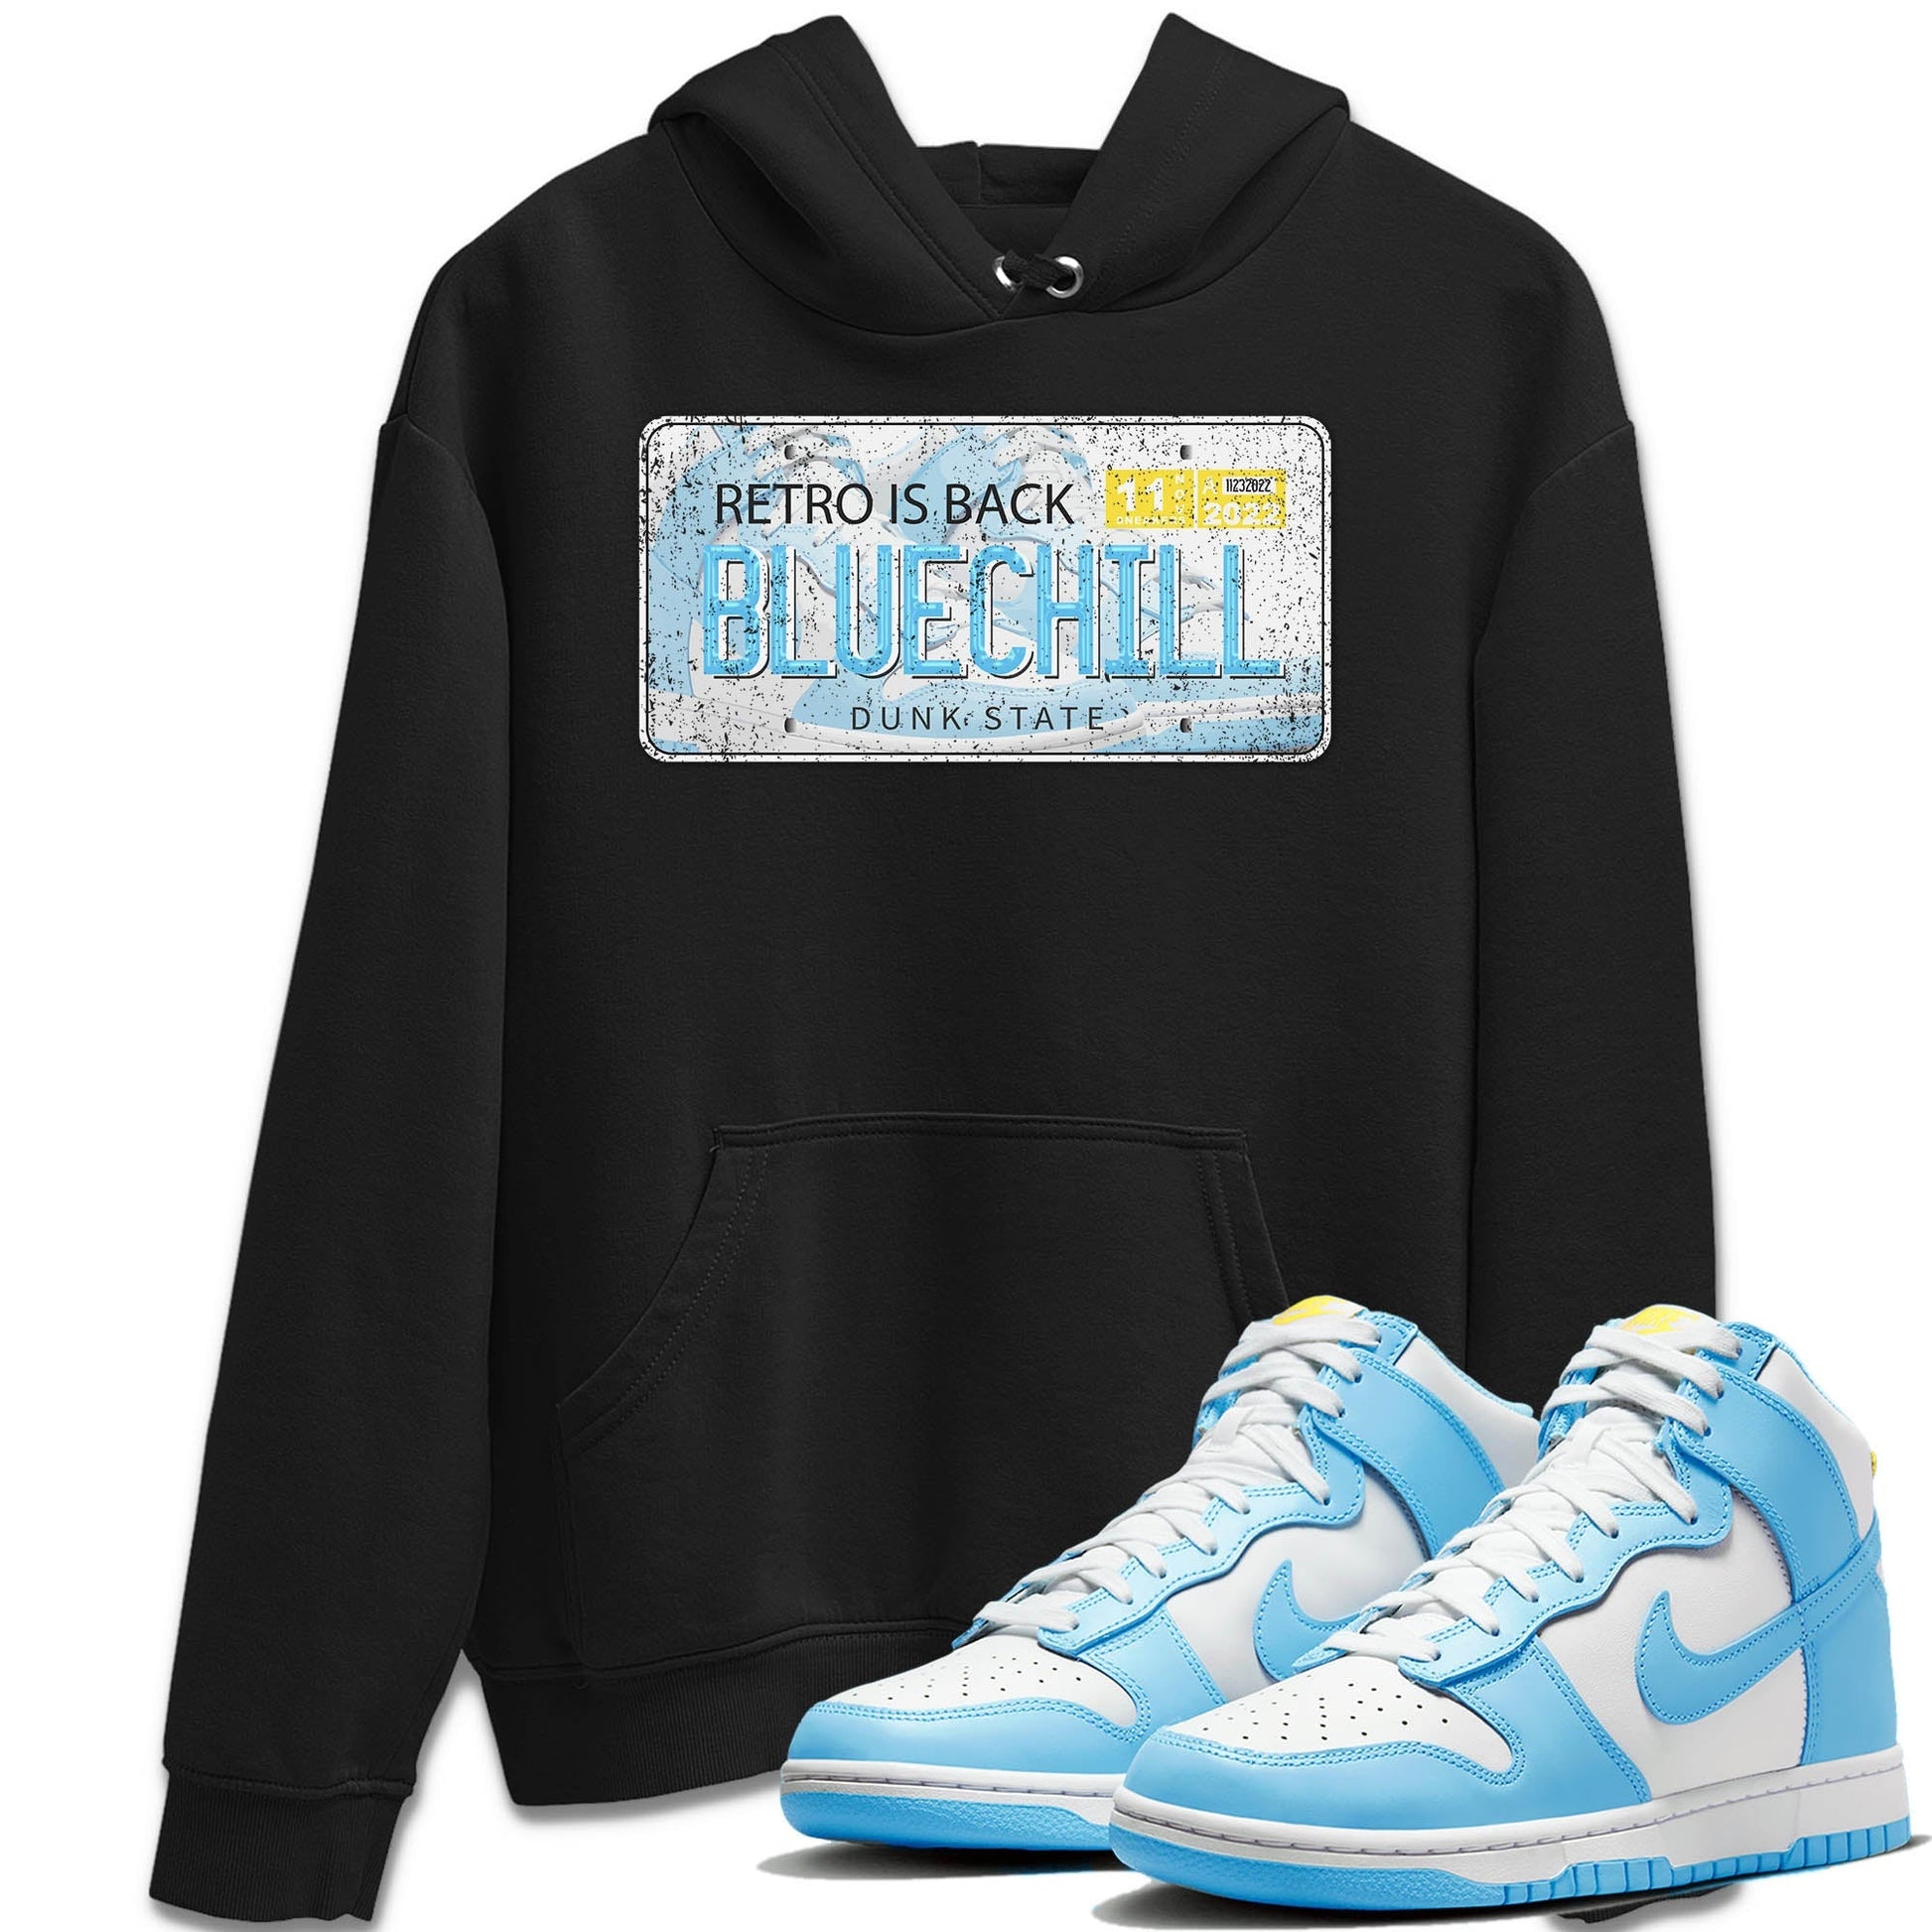 Nike Dunk High Blue Chill Sneaker Match Tees Jordan Plate Sneaker Tees Nike Dunk High Blue Chill Sneaker Release Tees Unisex Shirts